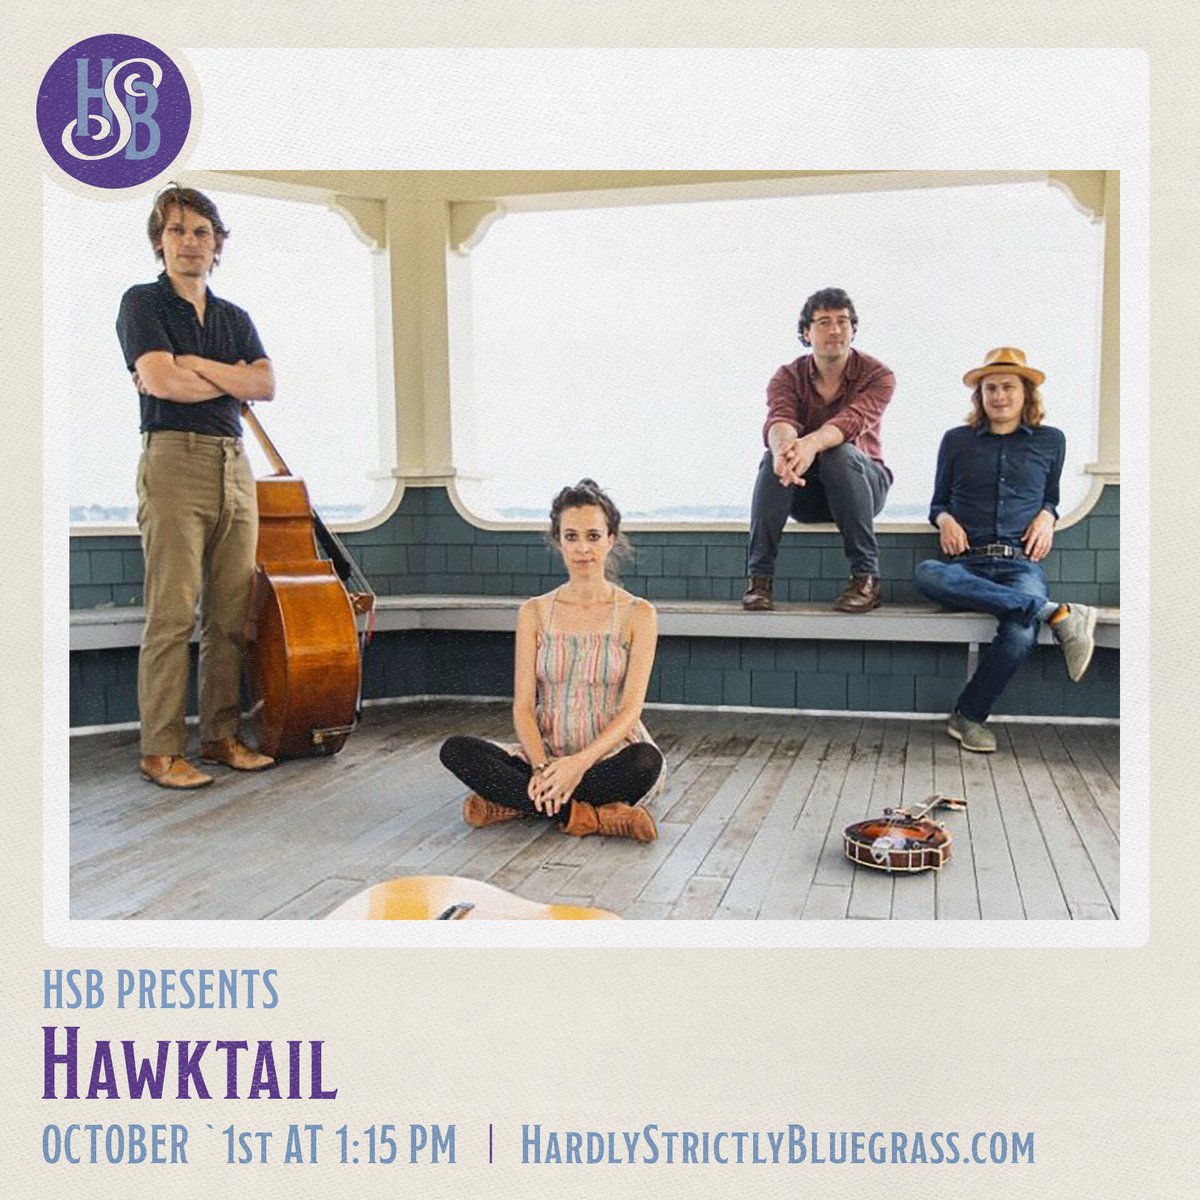 Playing virtual @HSBFest at 1:15 PST this Friday. Tune in via their website, YouTube, or FB page.